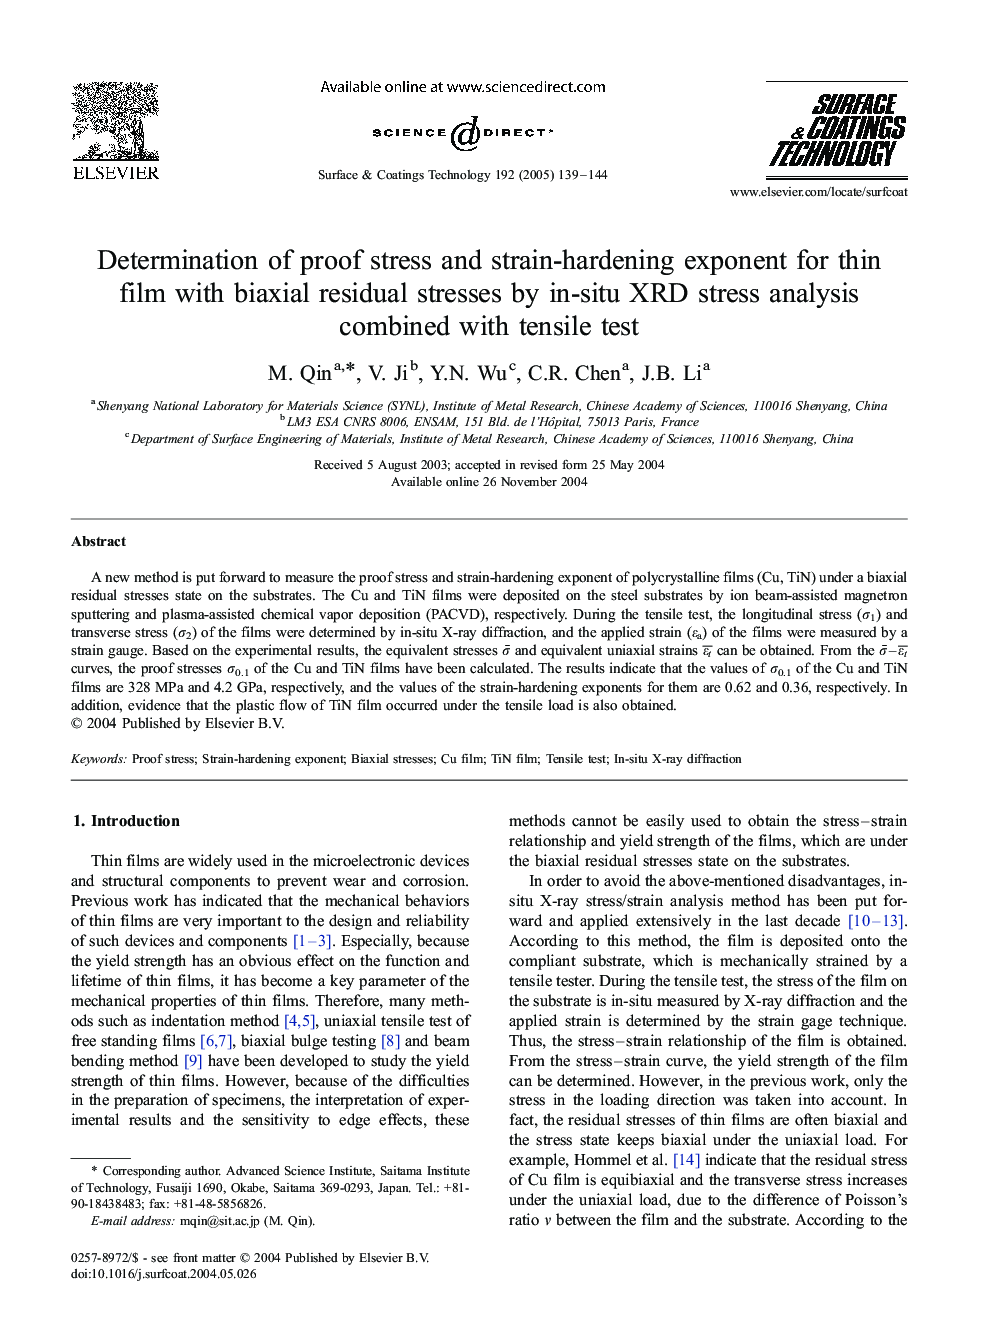 Determination of proof stress and strain-hardening exponent for thin film with biaxial residual stresses by in-situ XRD stress analysis combined with tensile test